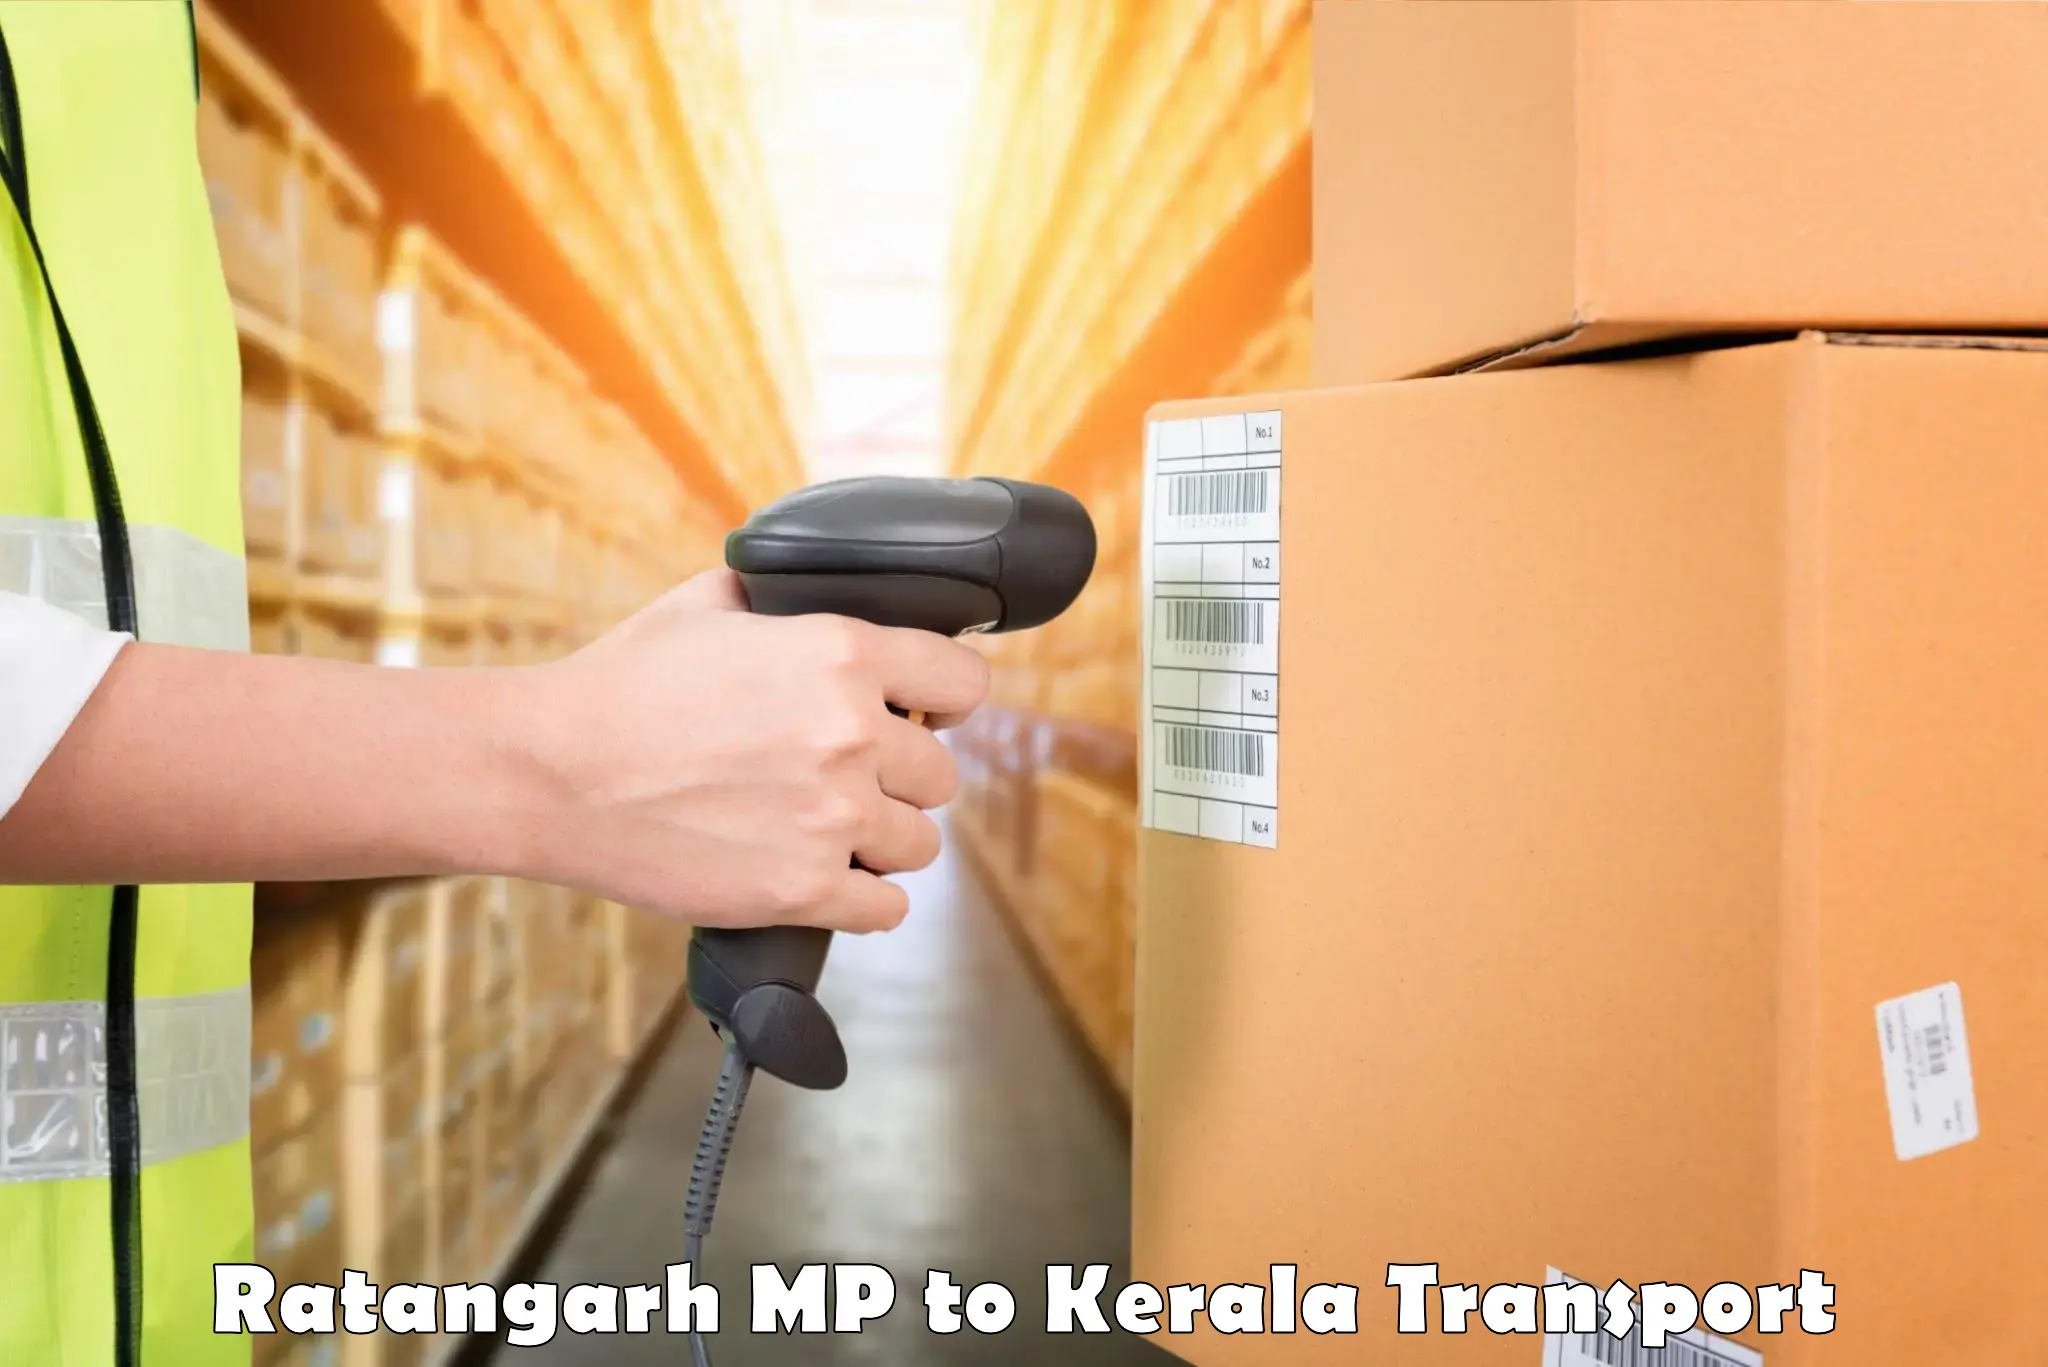 Goods delivery service Ratangarh MP to Chungatra